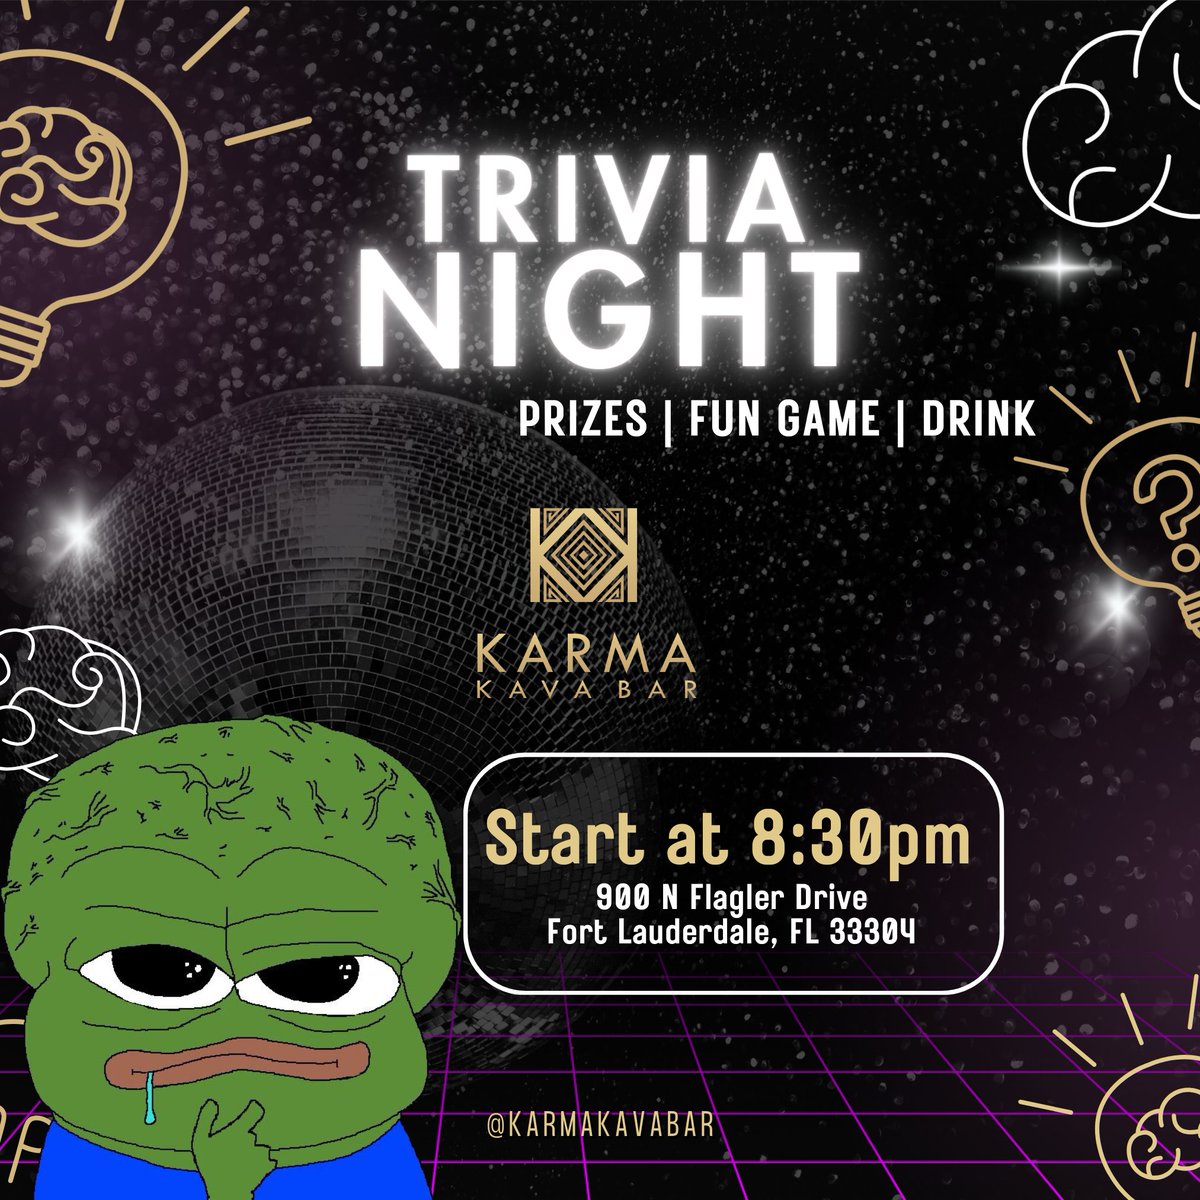 Big Brain Energy tonight at Karma Kava. It's Tuesday and that means Trivia and a $50 bar tab for the winner. $25 for second place. Trivia night is 🔥. #trivia #fortlauderdale #kavabar